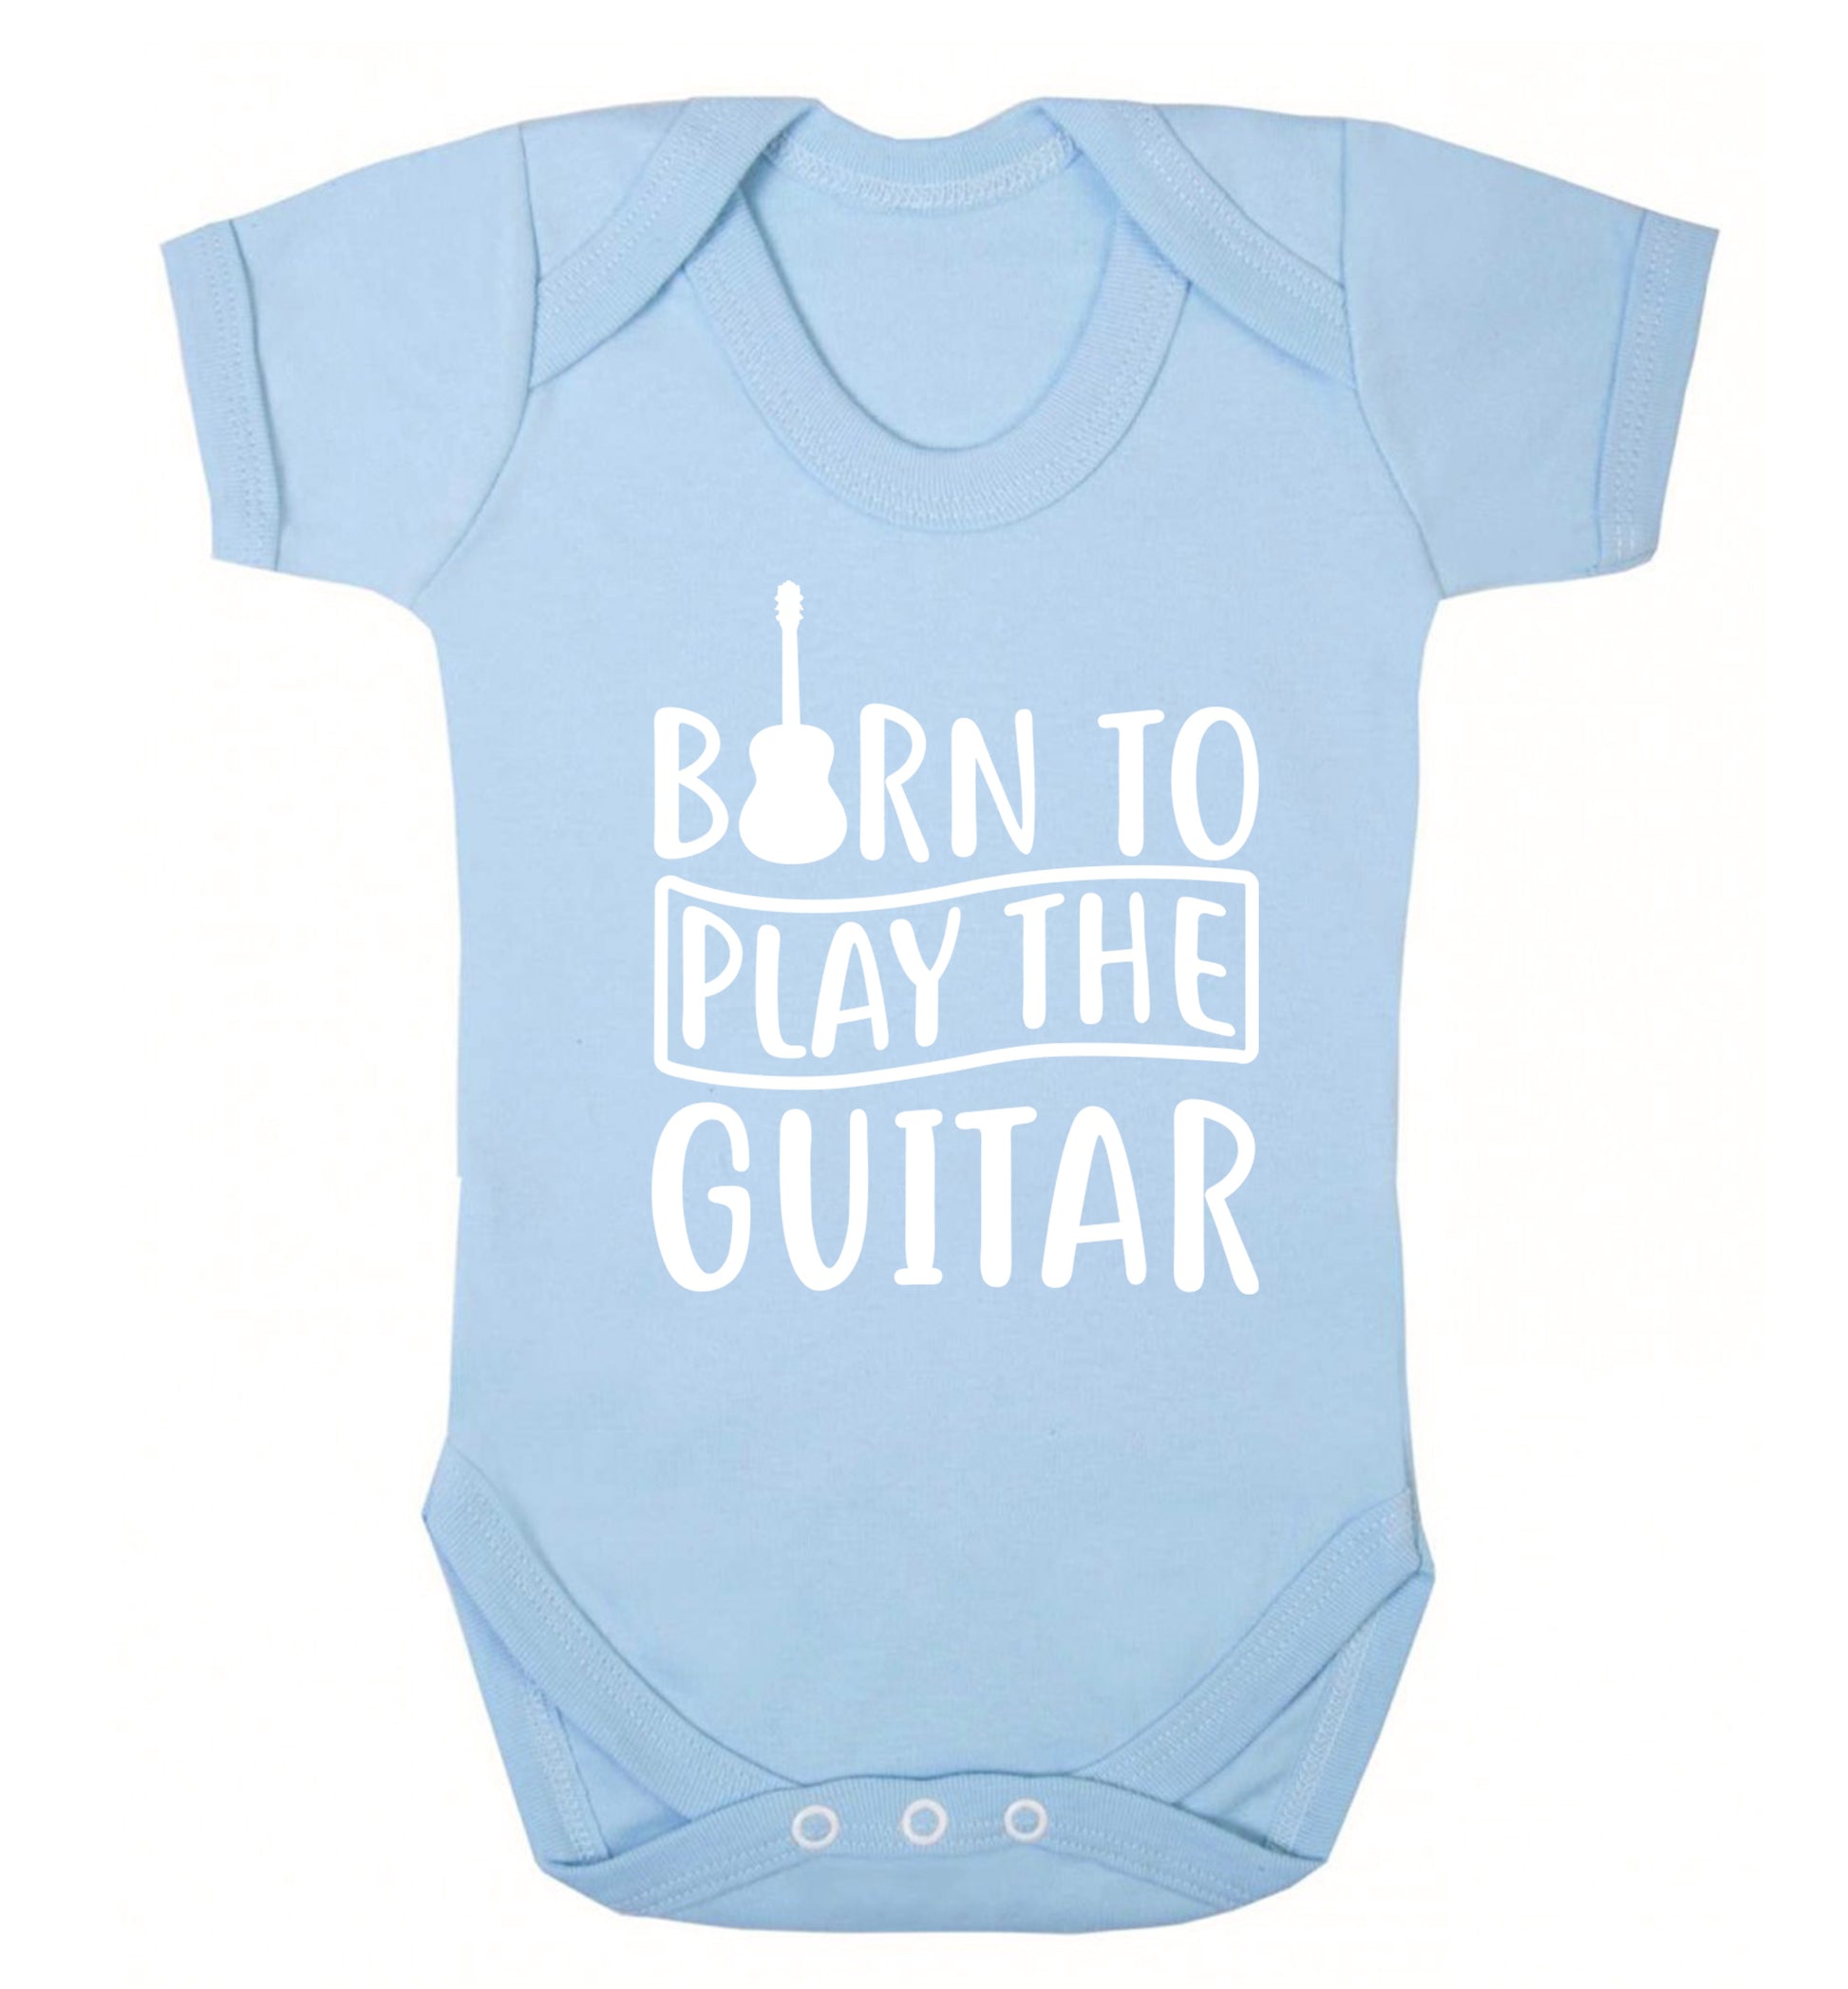 Born to play the guitar Baby Vest pale blue 18-24 months